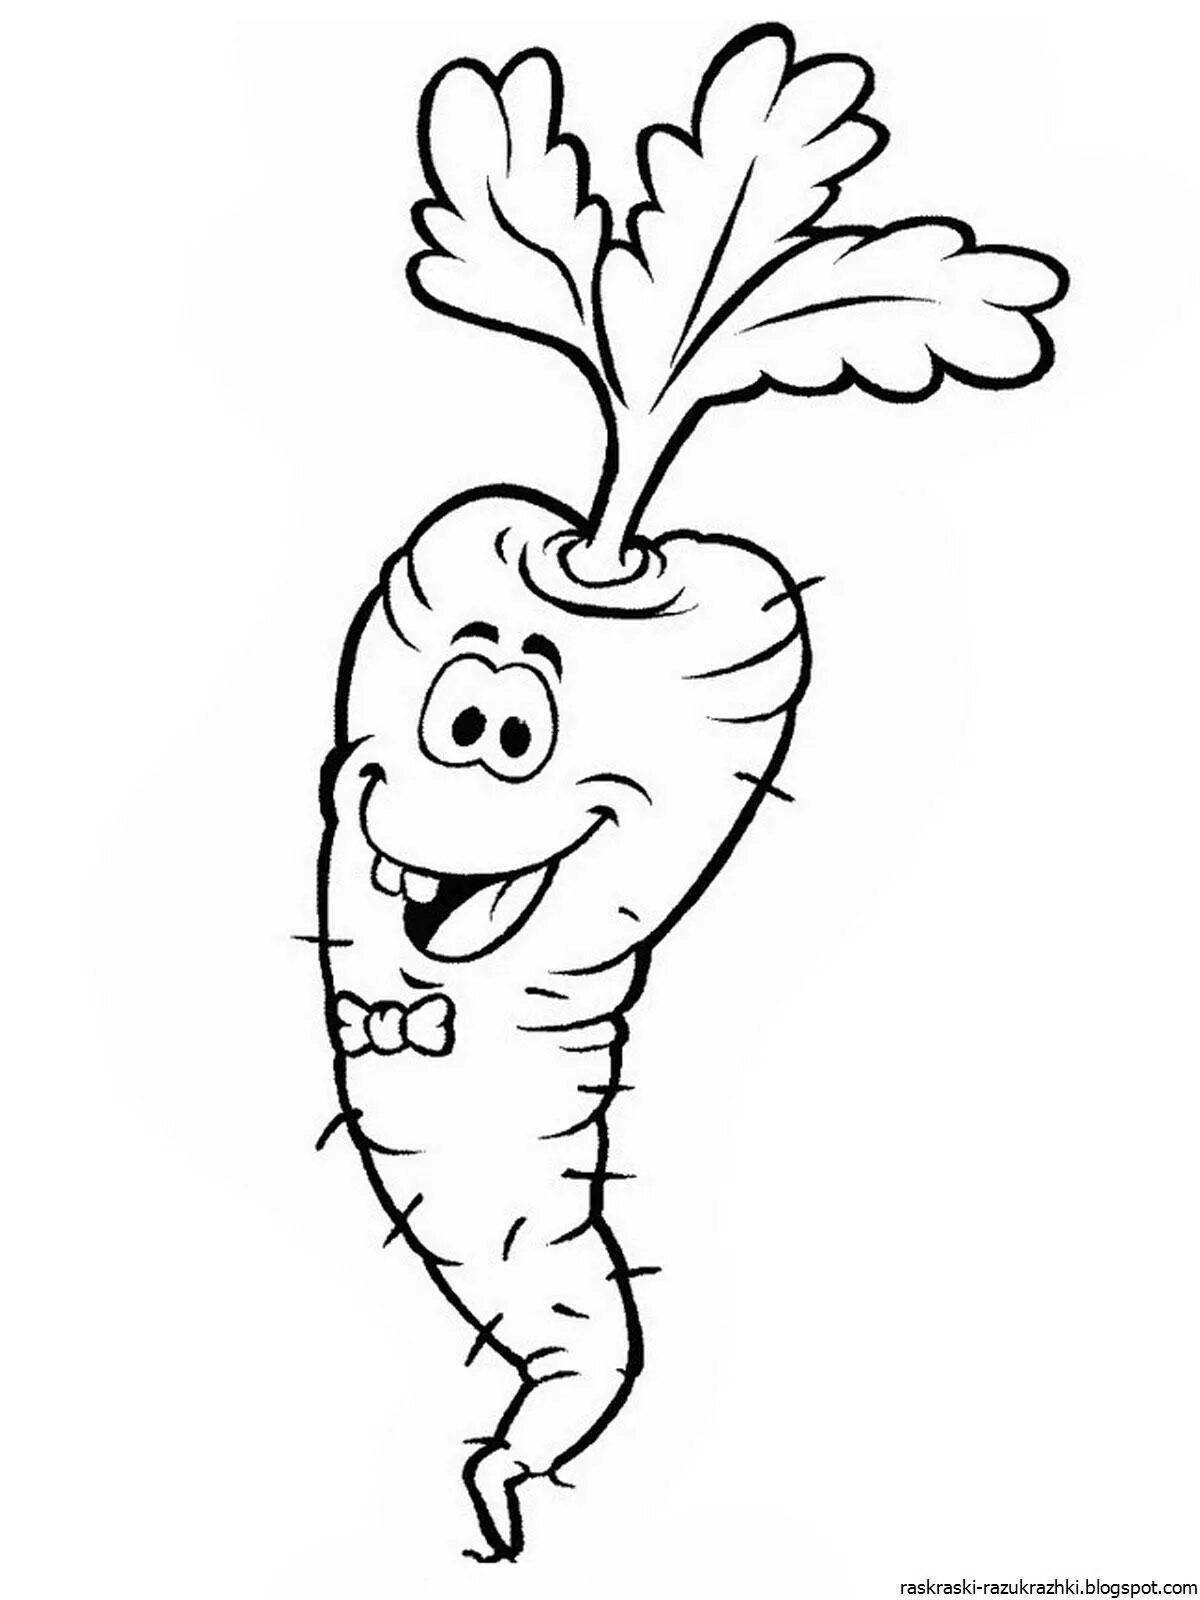 Colored crazy carrot drawing for kids